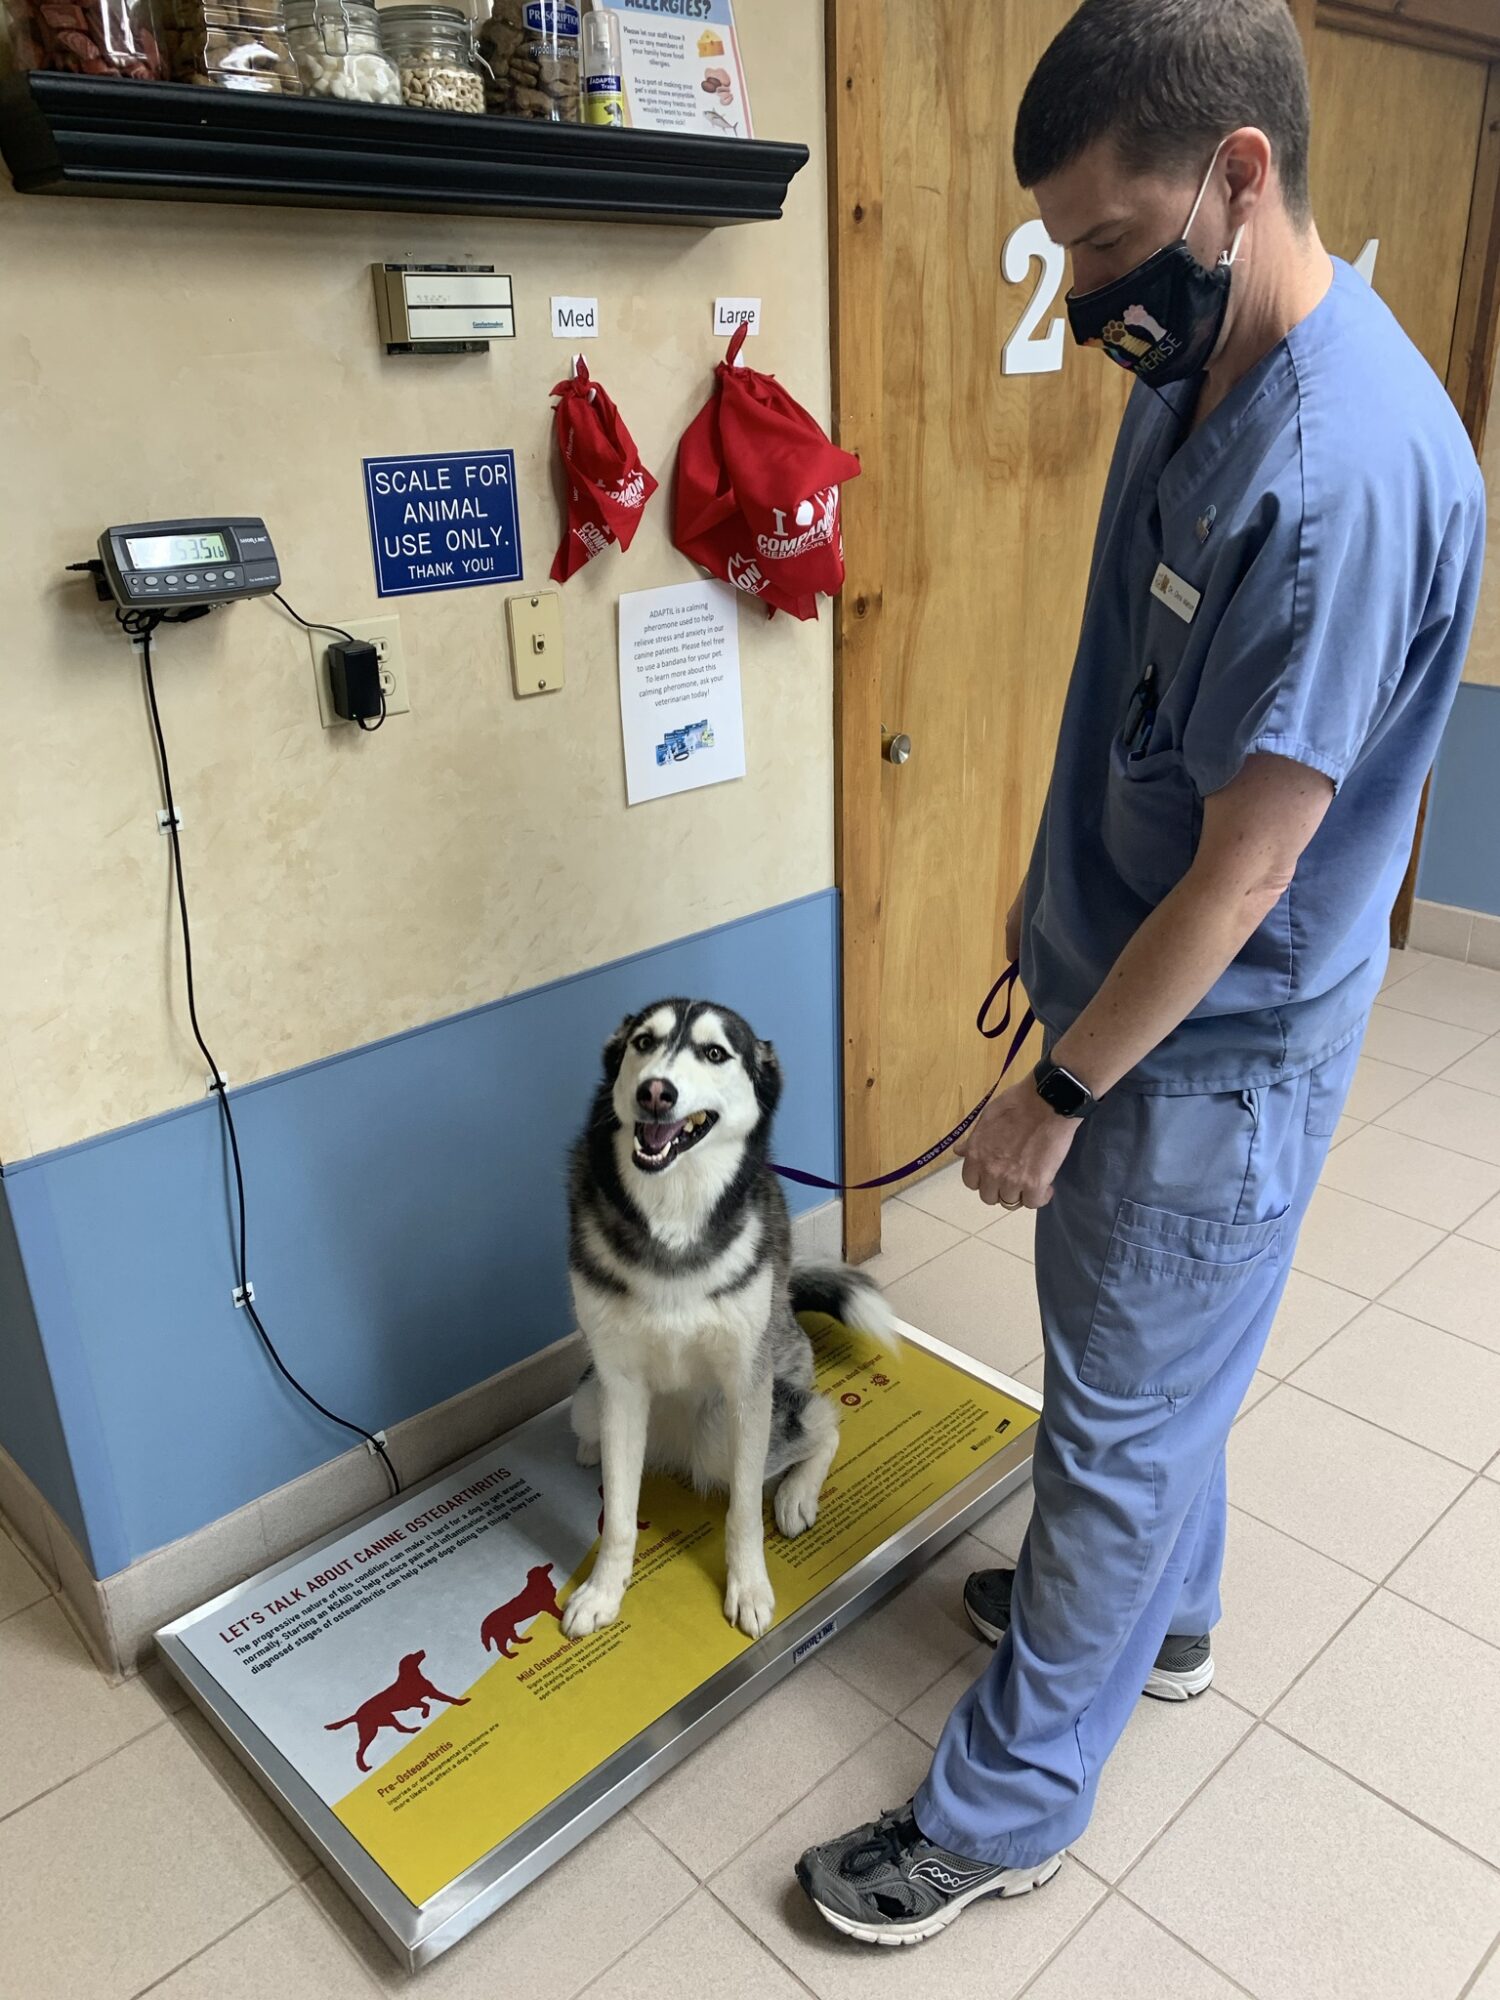 First, our staff will place your pet on the scale to get an accurate weight.